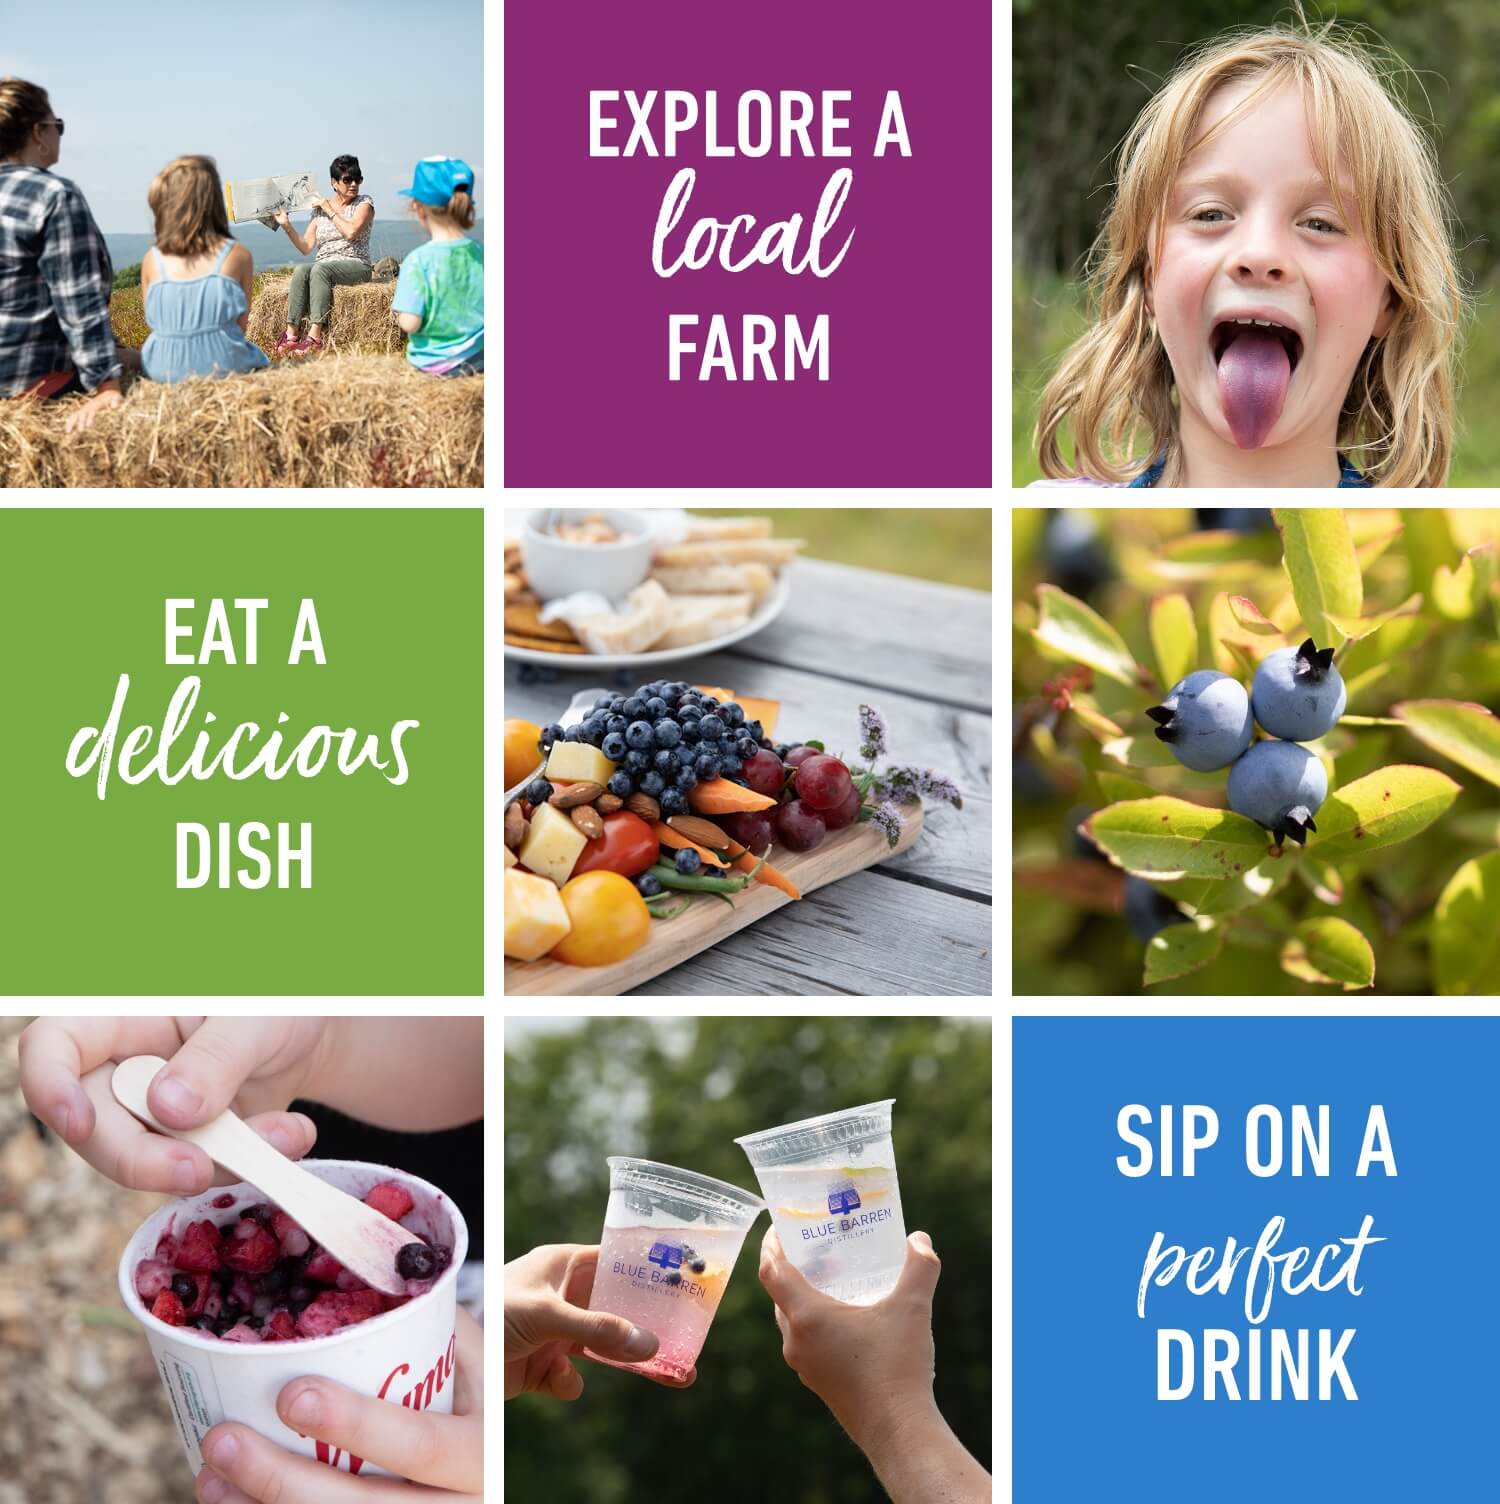 Explore a local farm, eat a delicious dish, and sip on a perfect drink at Wild Blueberry weekend